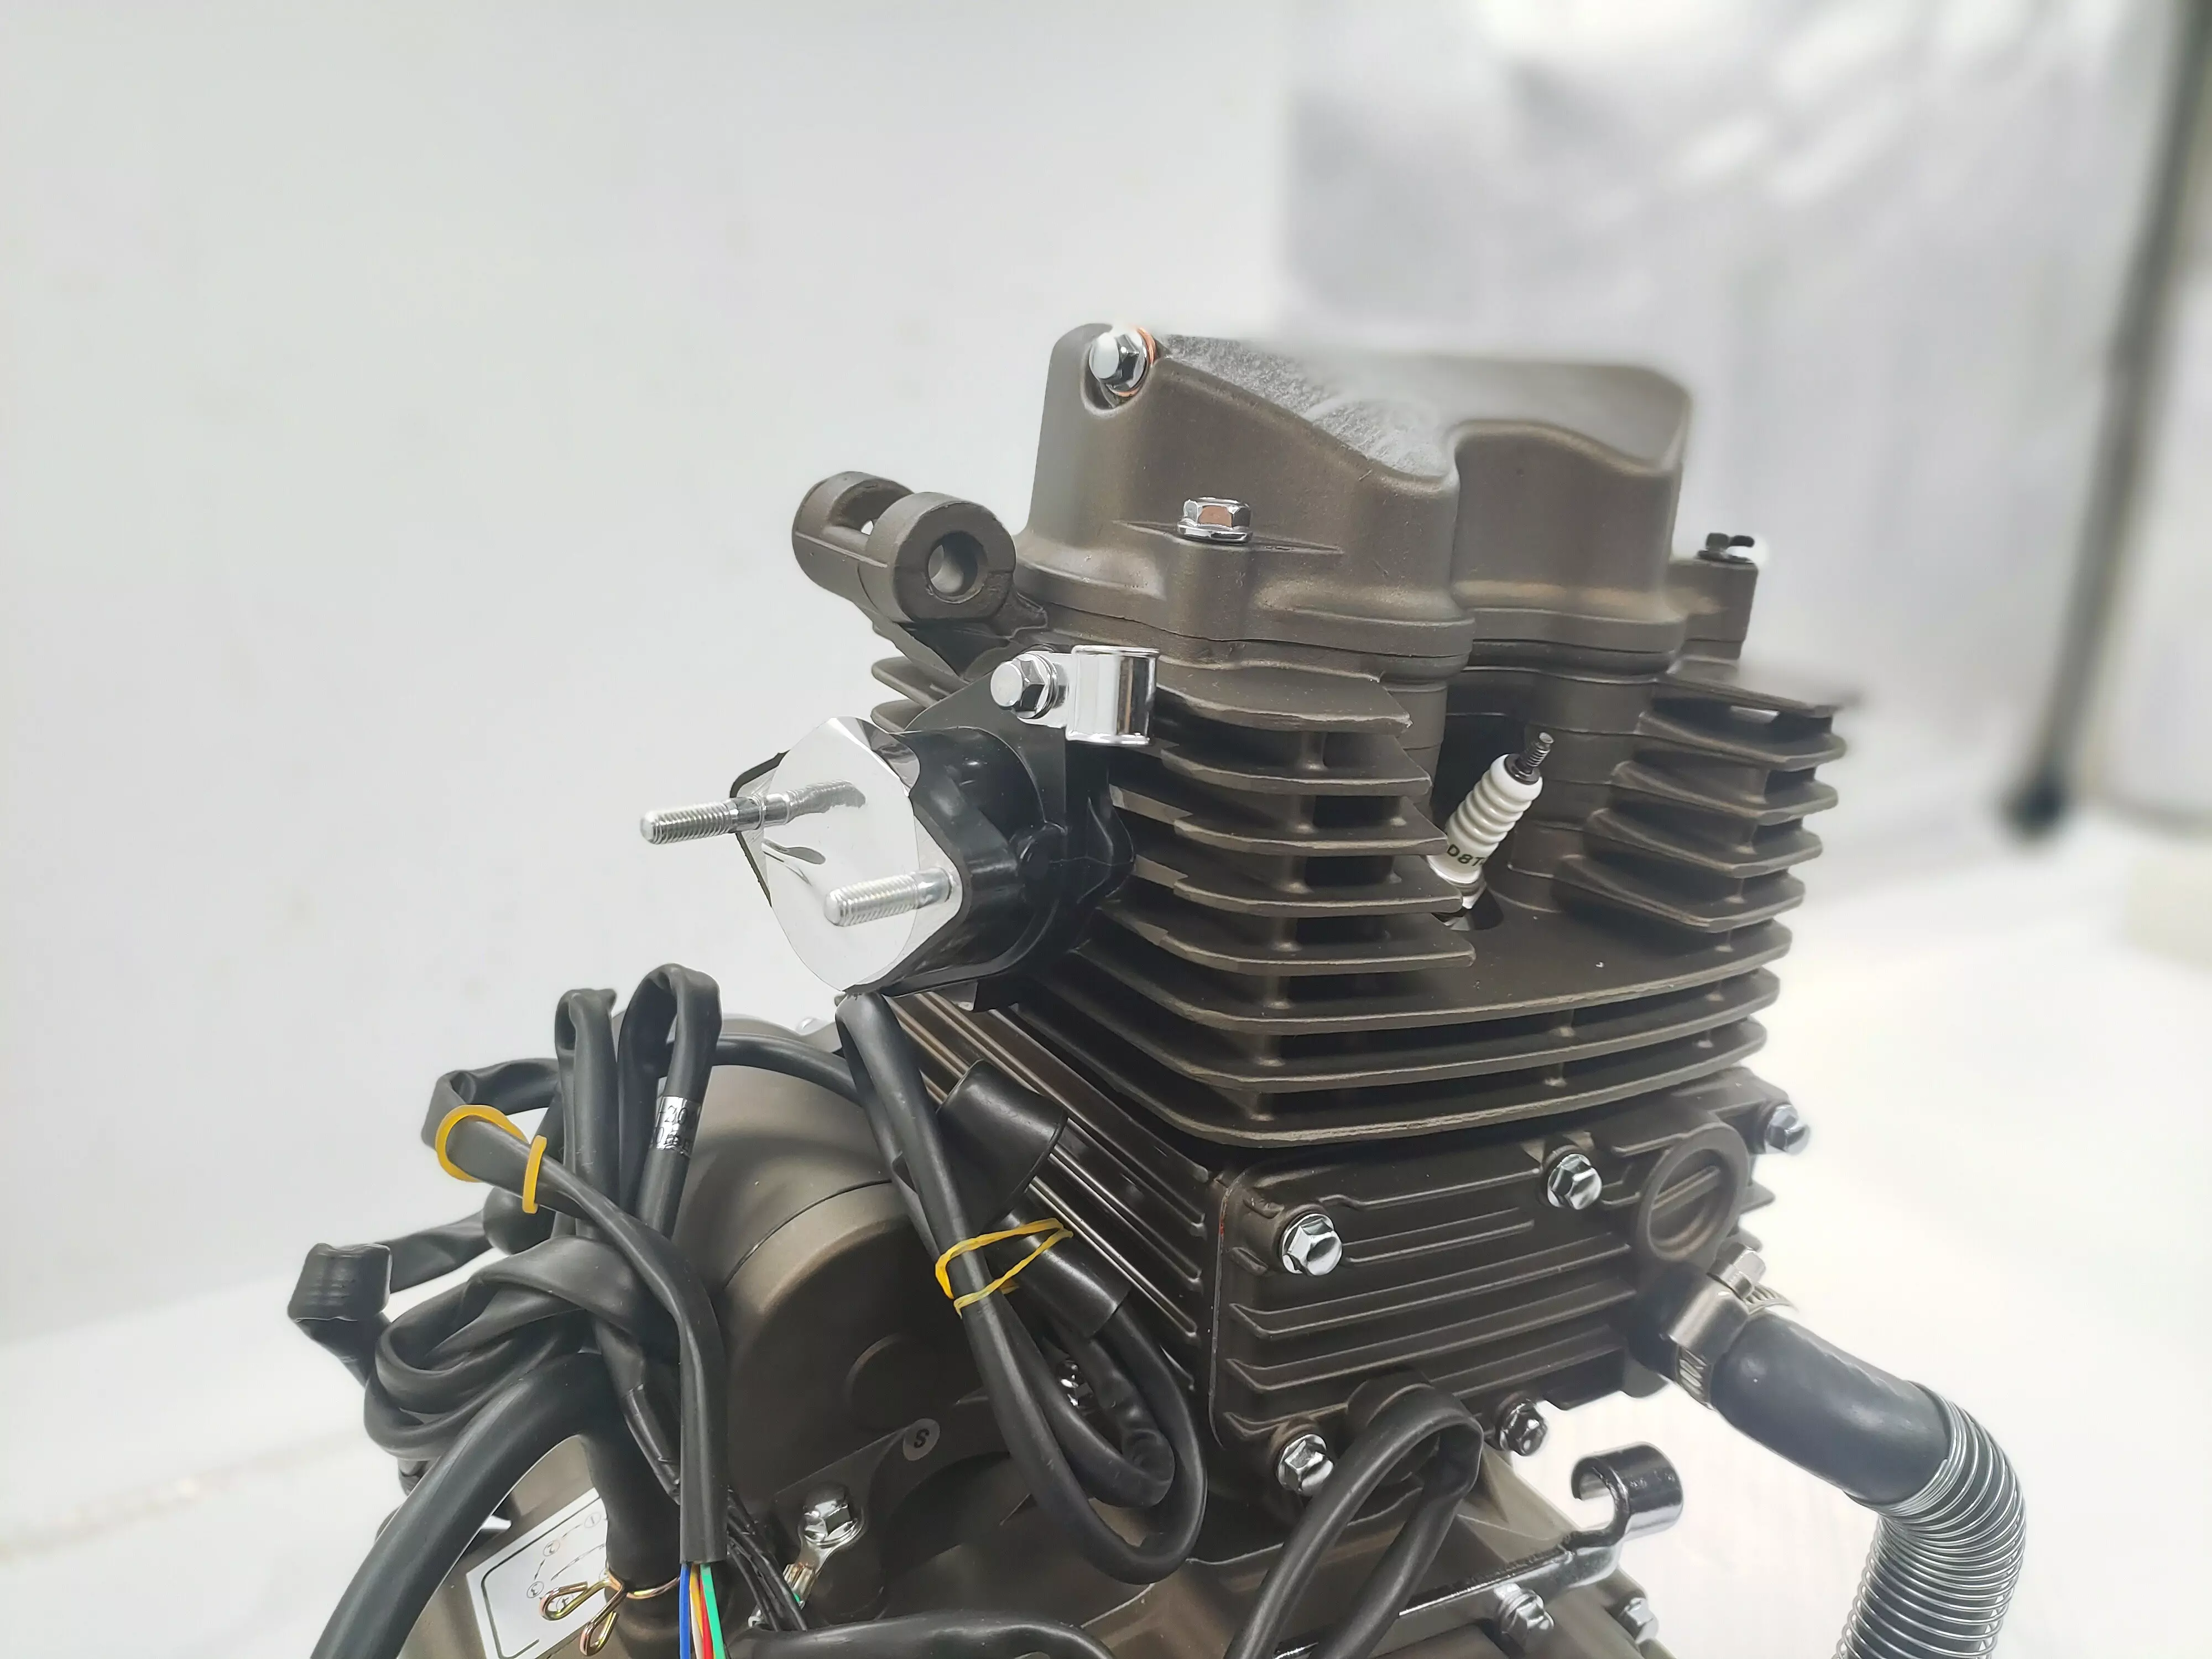 CG175cc Cool with the  pump DAYANG LIFAN Motorcycle Engine Assembly Single Cylinder Four Stroke Style China CCC Origin Type